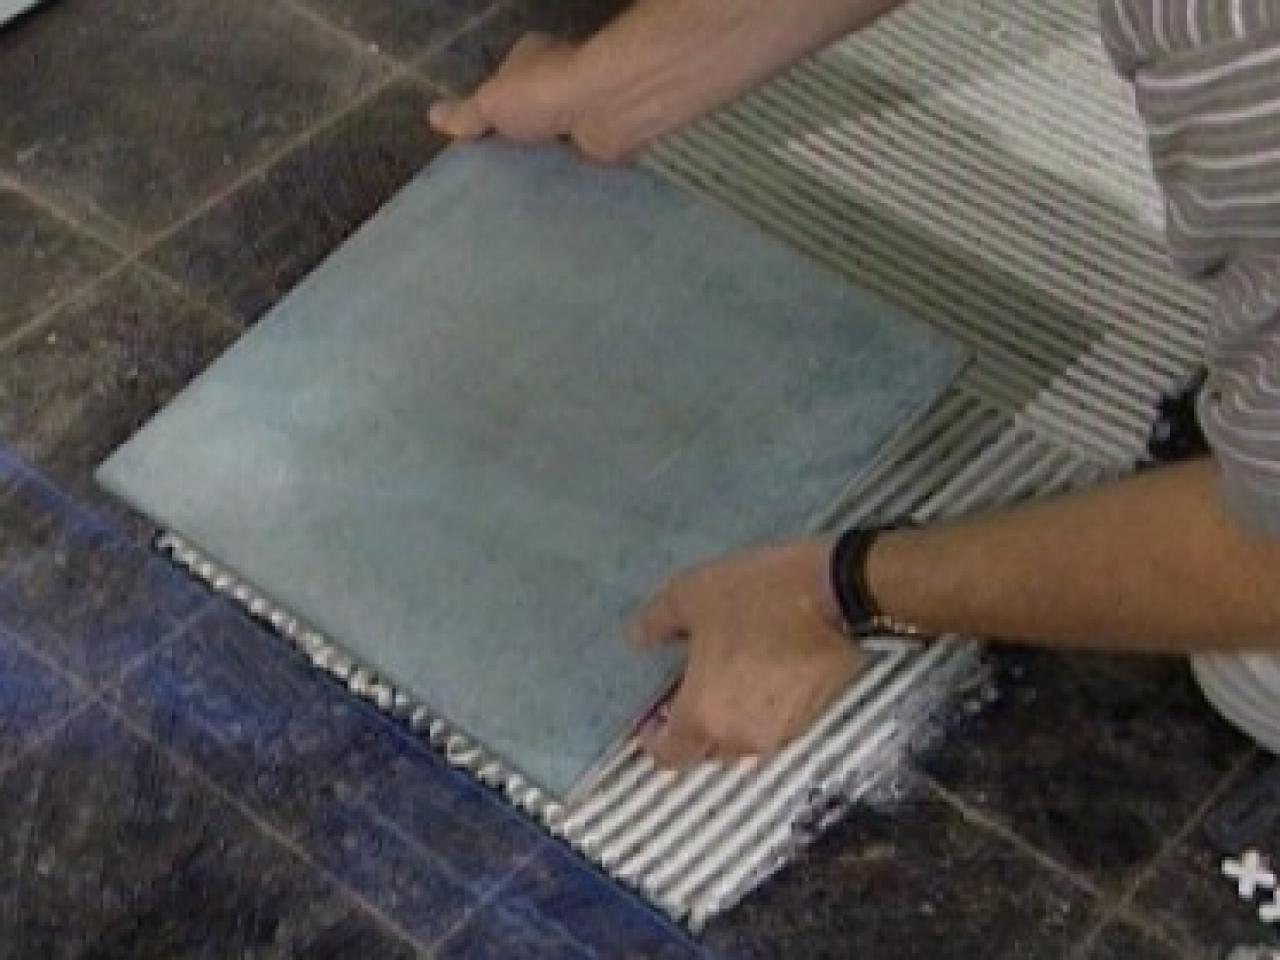 How To Tile A Floor Tos Diy, How To Lay Ceramic Tile On Basement Floor